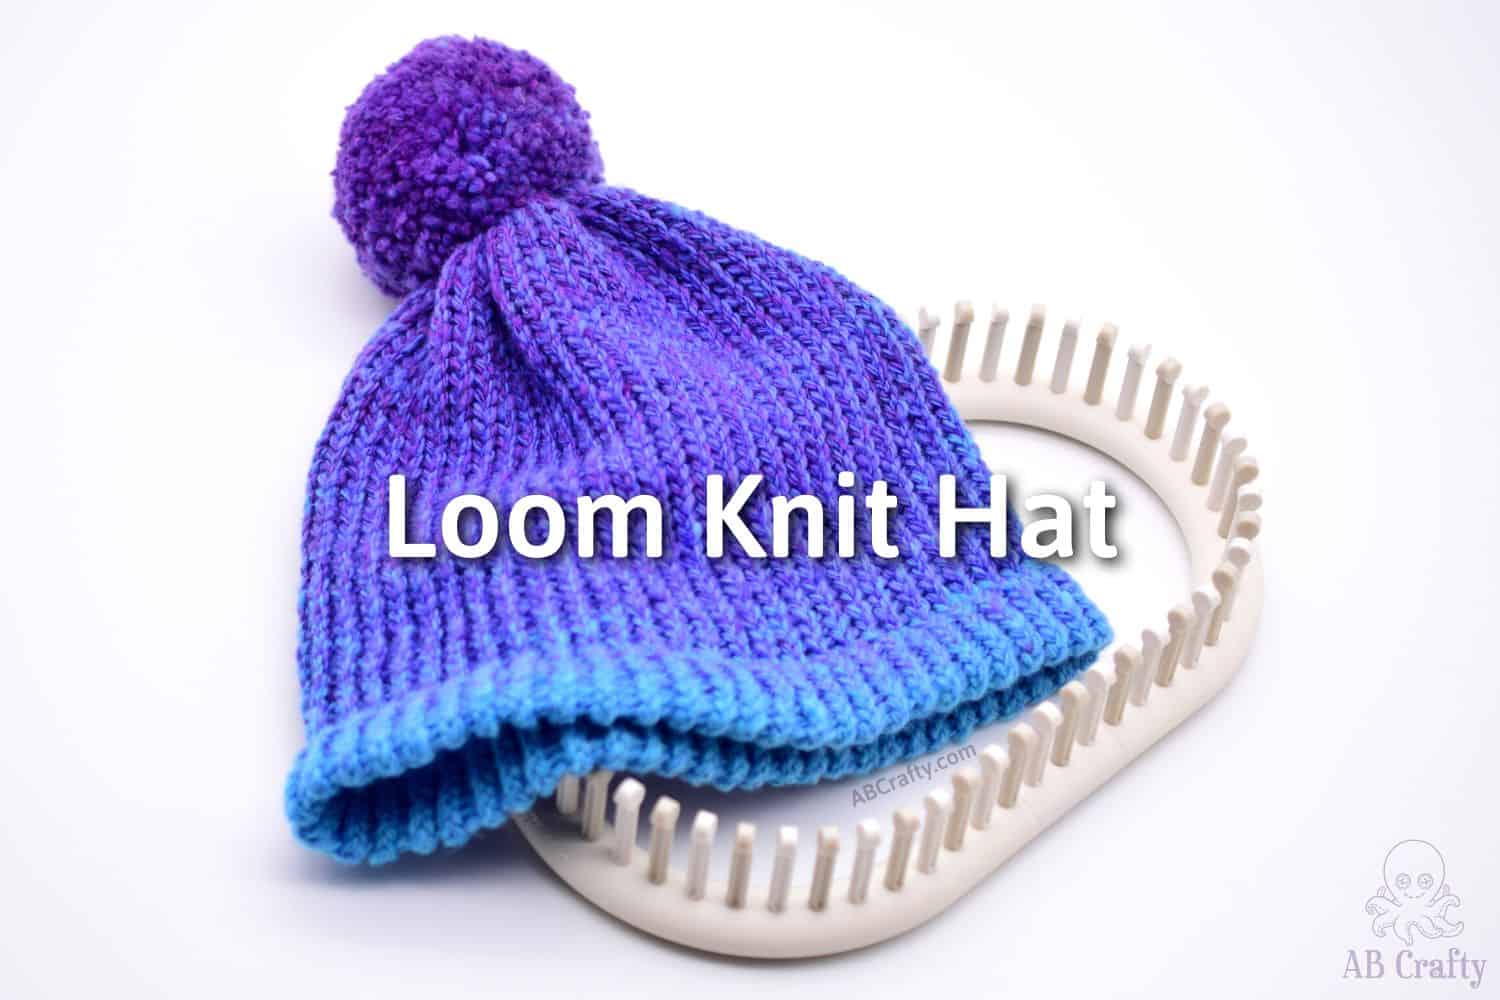 loom-knit-hat-easy-instructions-to-loom-knit-a-hat-ab-crafty